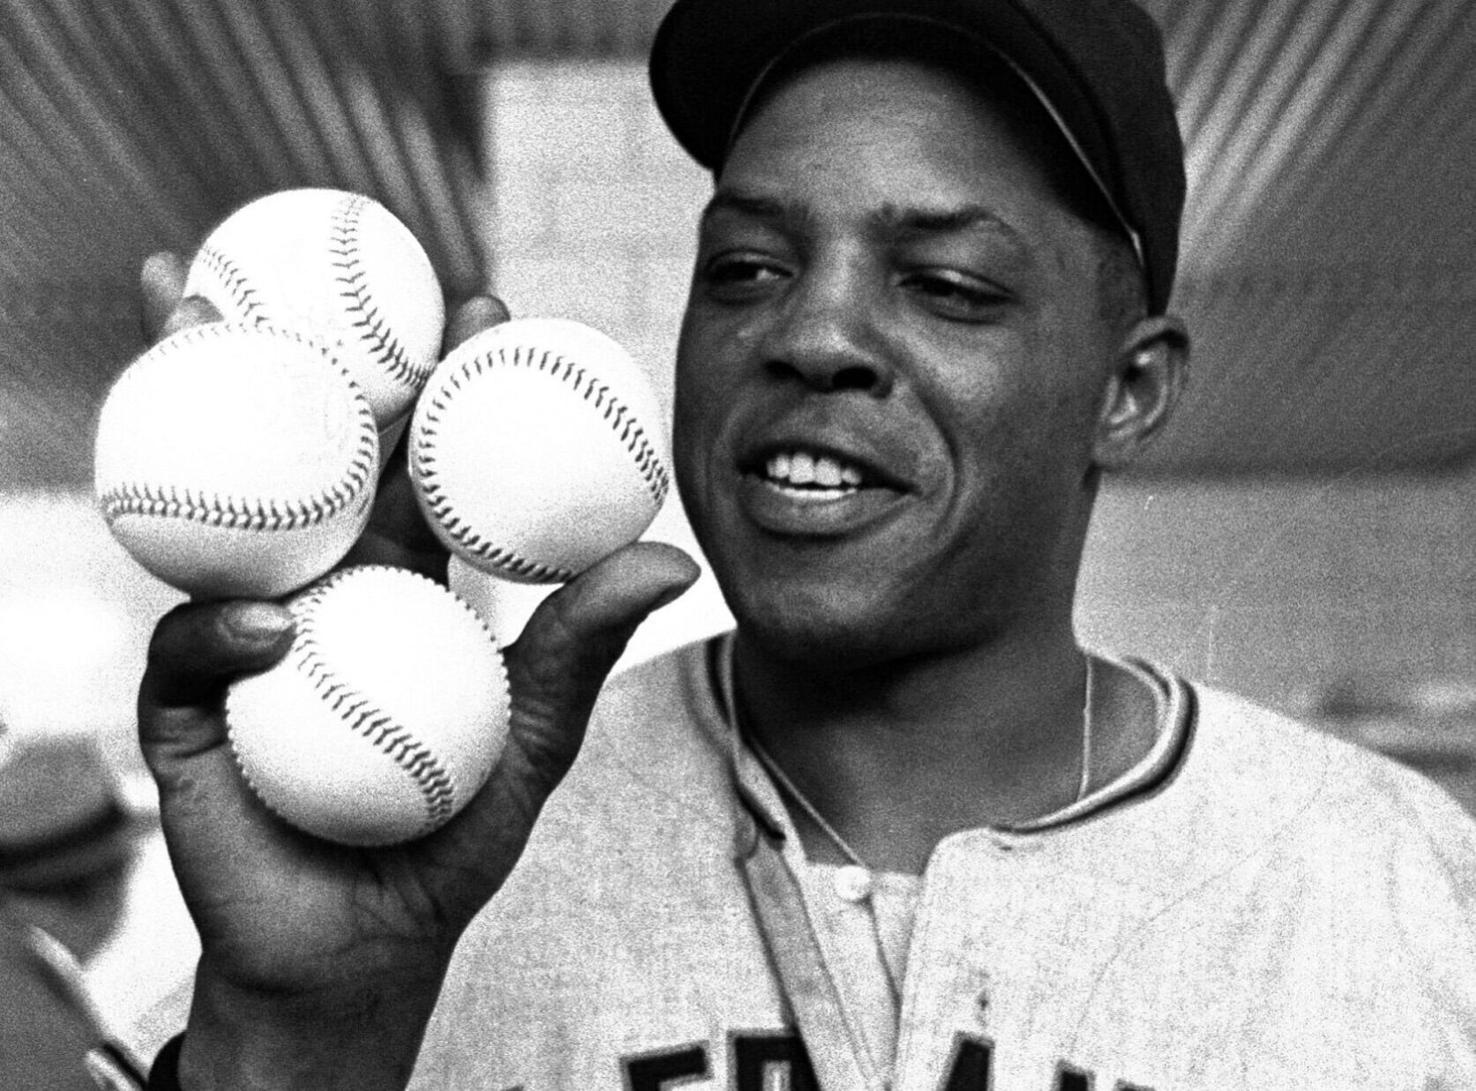 Baseball legend Willie Mays turns 90 today. A look back at his life, in